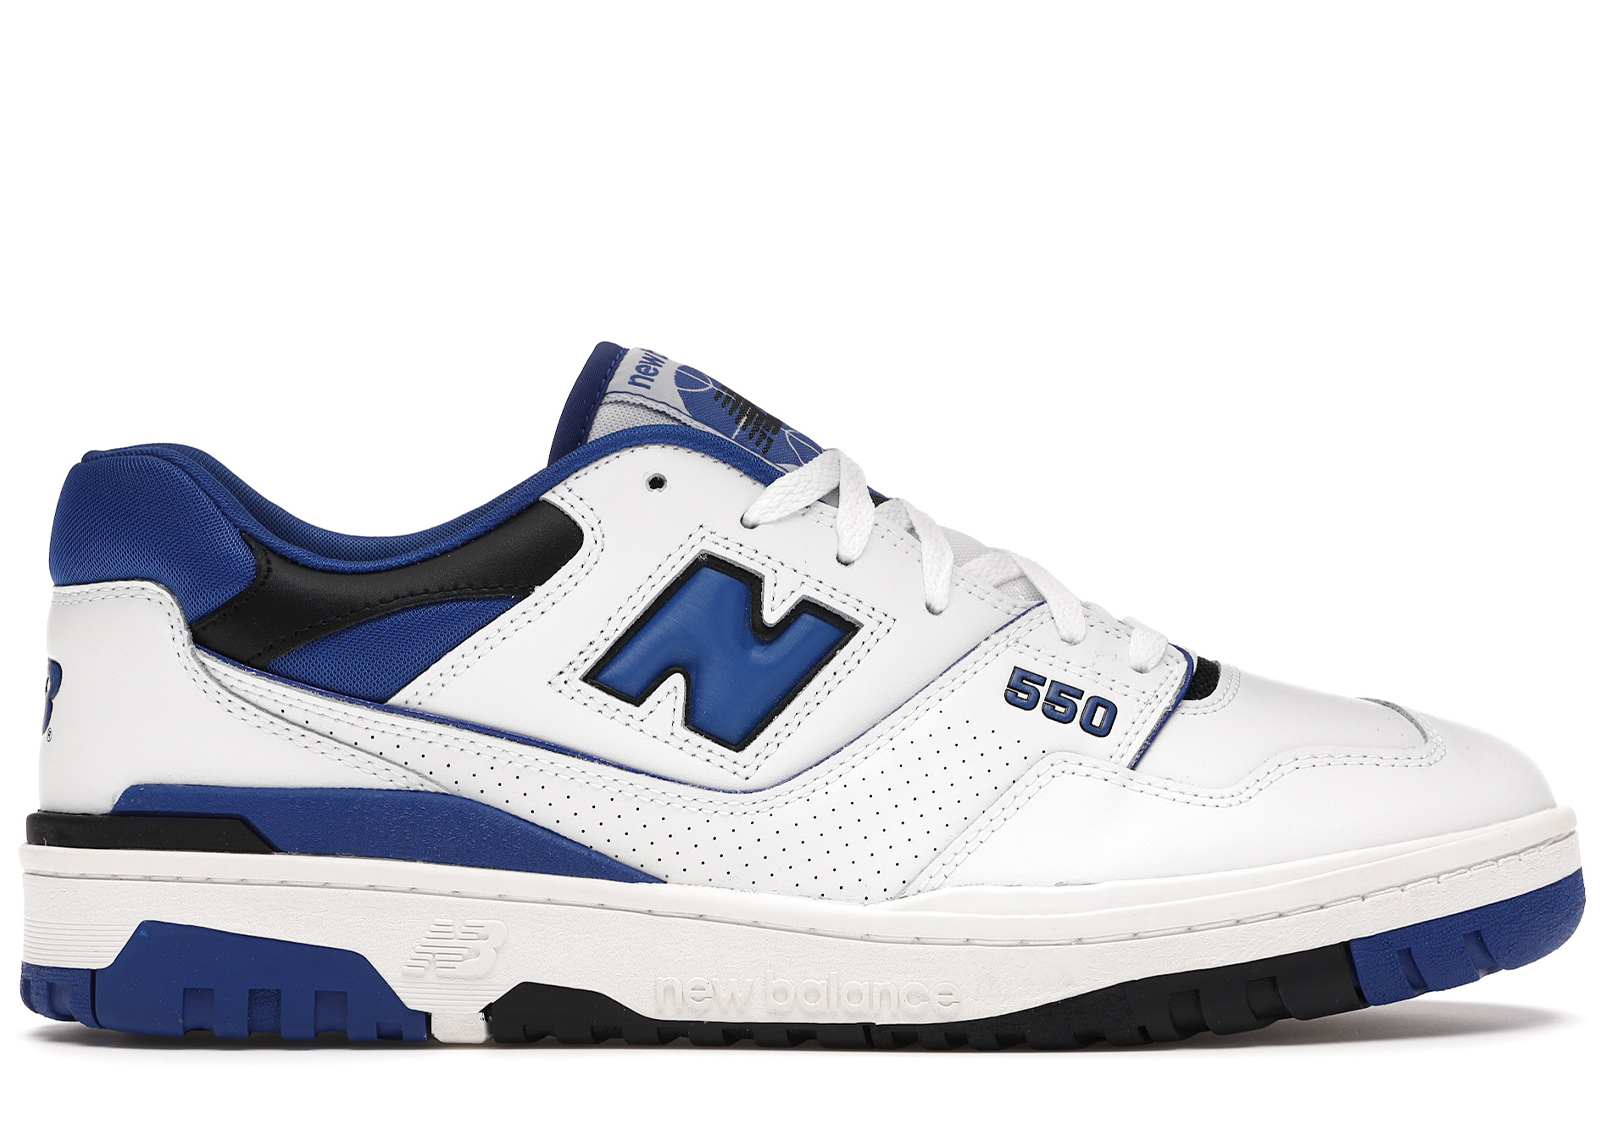 Buy New Balance Size 14 Shoes & New Sneakers - StockX